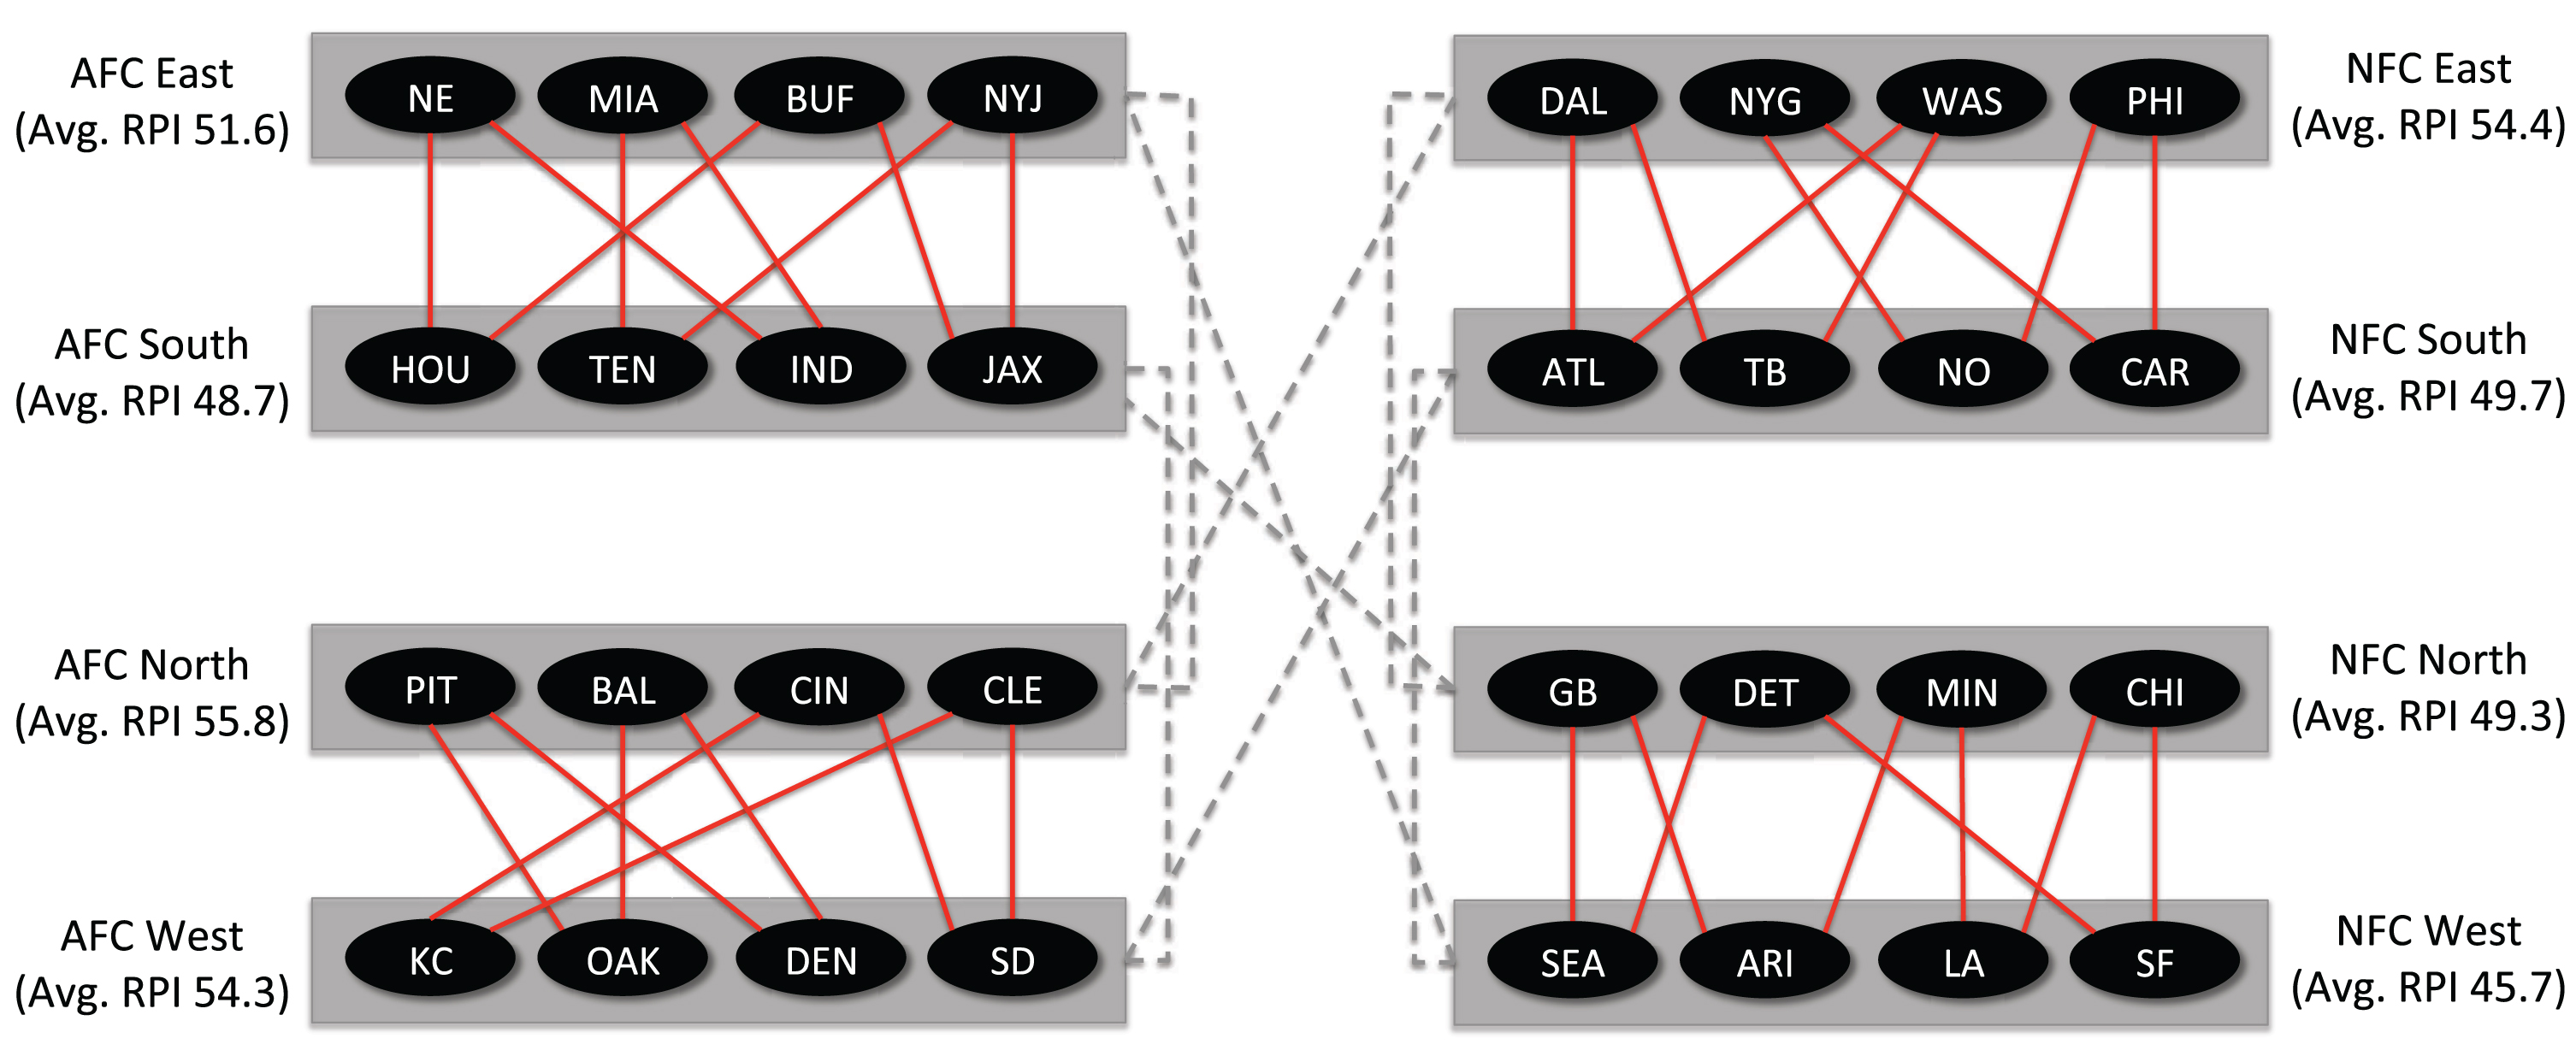 Games assigned by the comparison path method and official schedule for the 2016 NFL season.